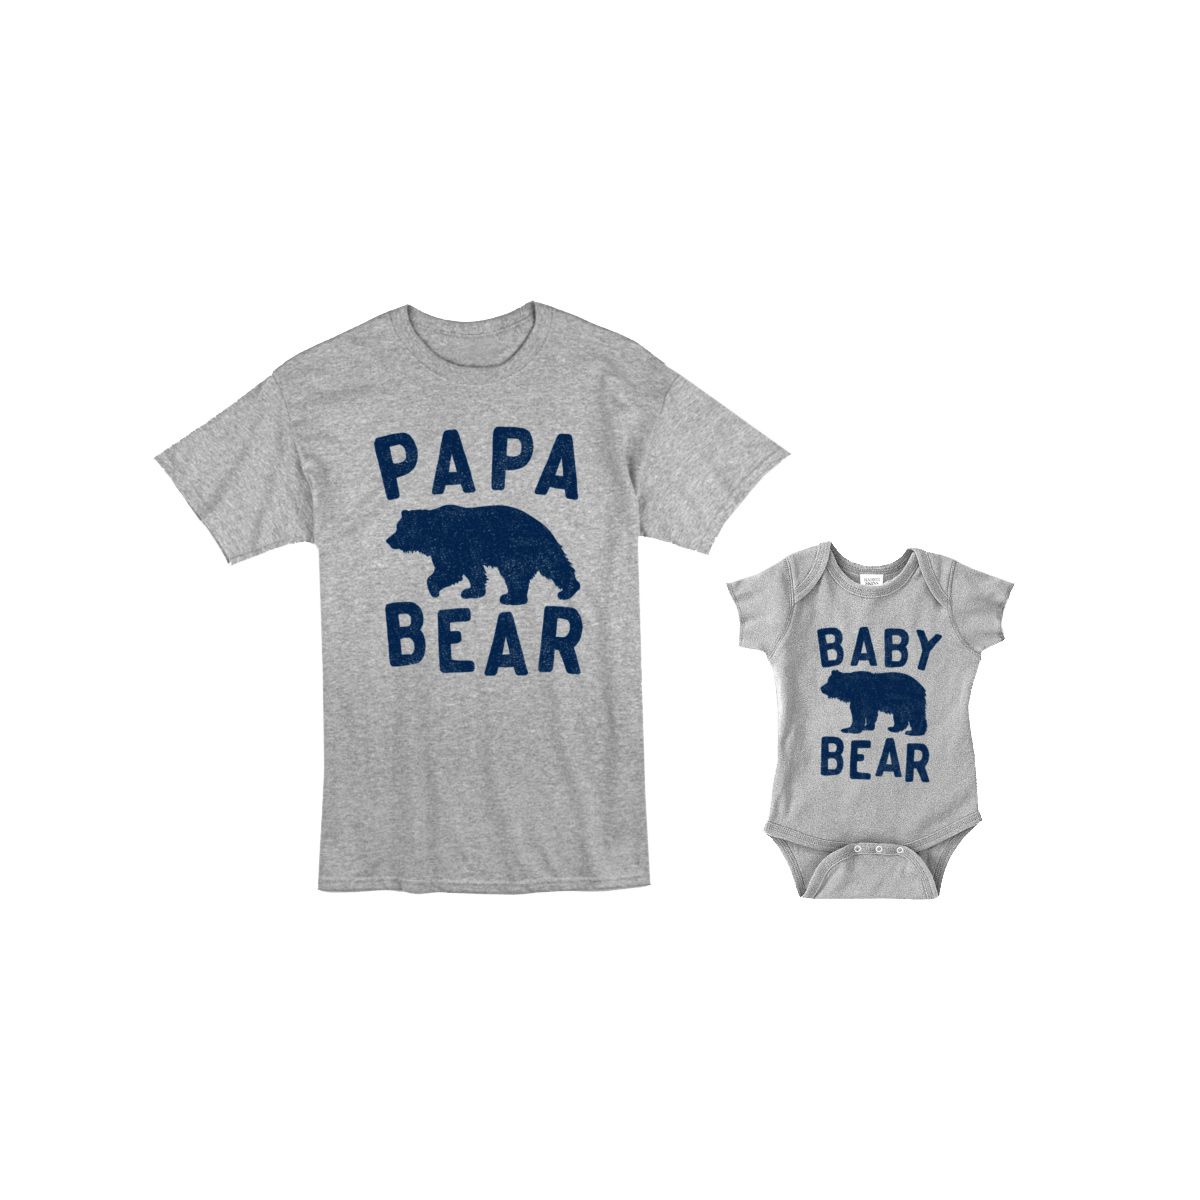 FATHER AND BABY MATCHING SET